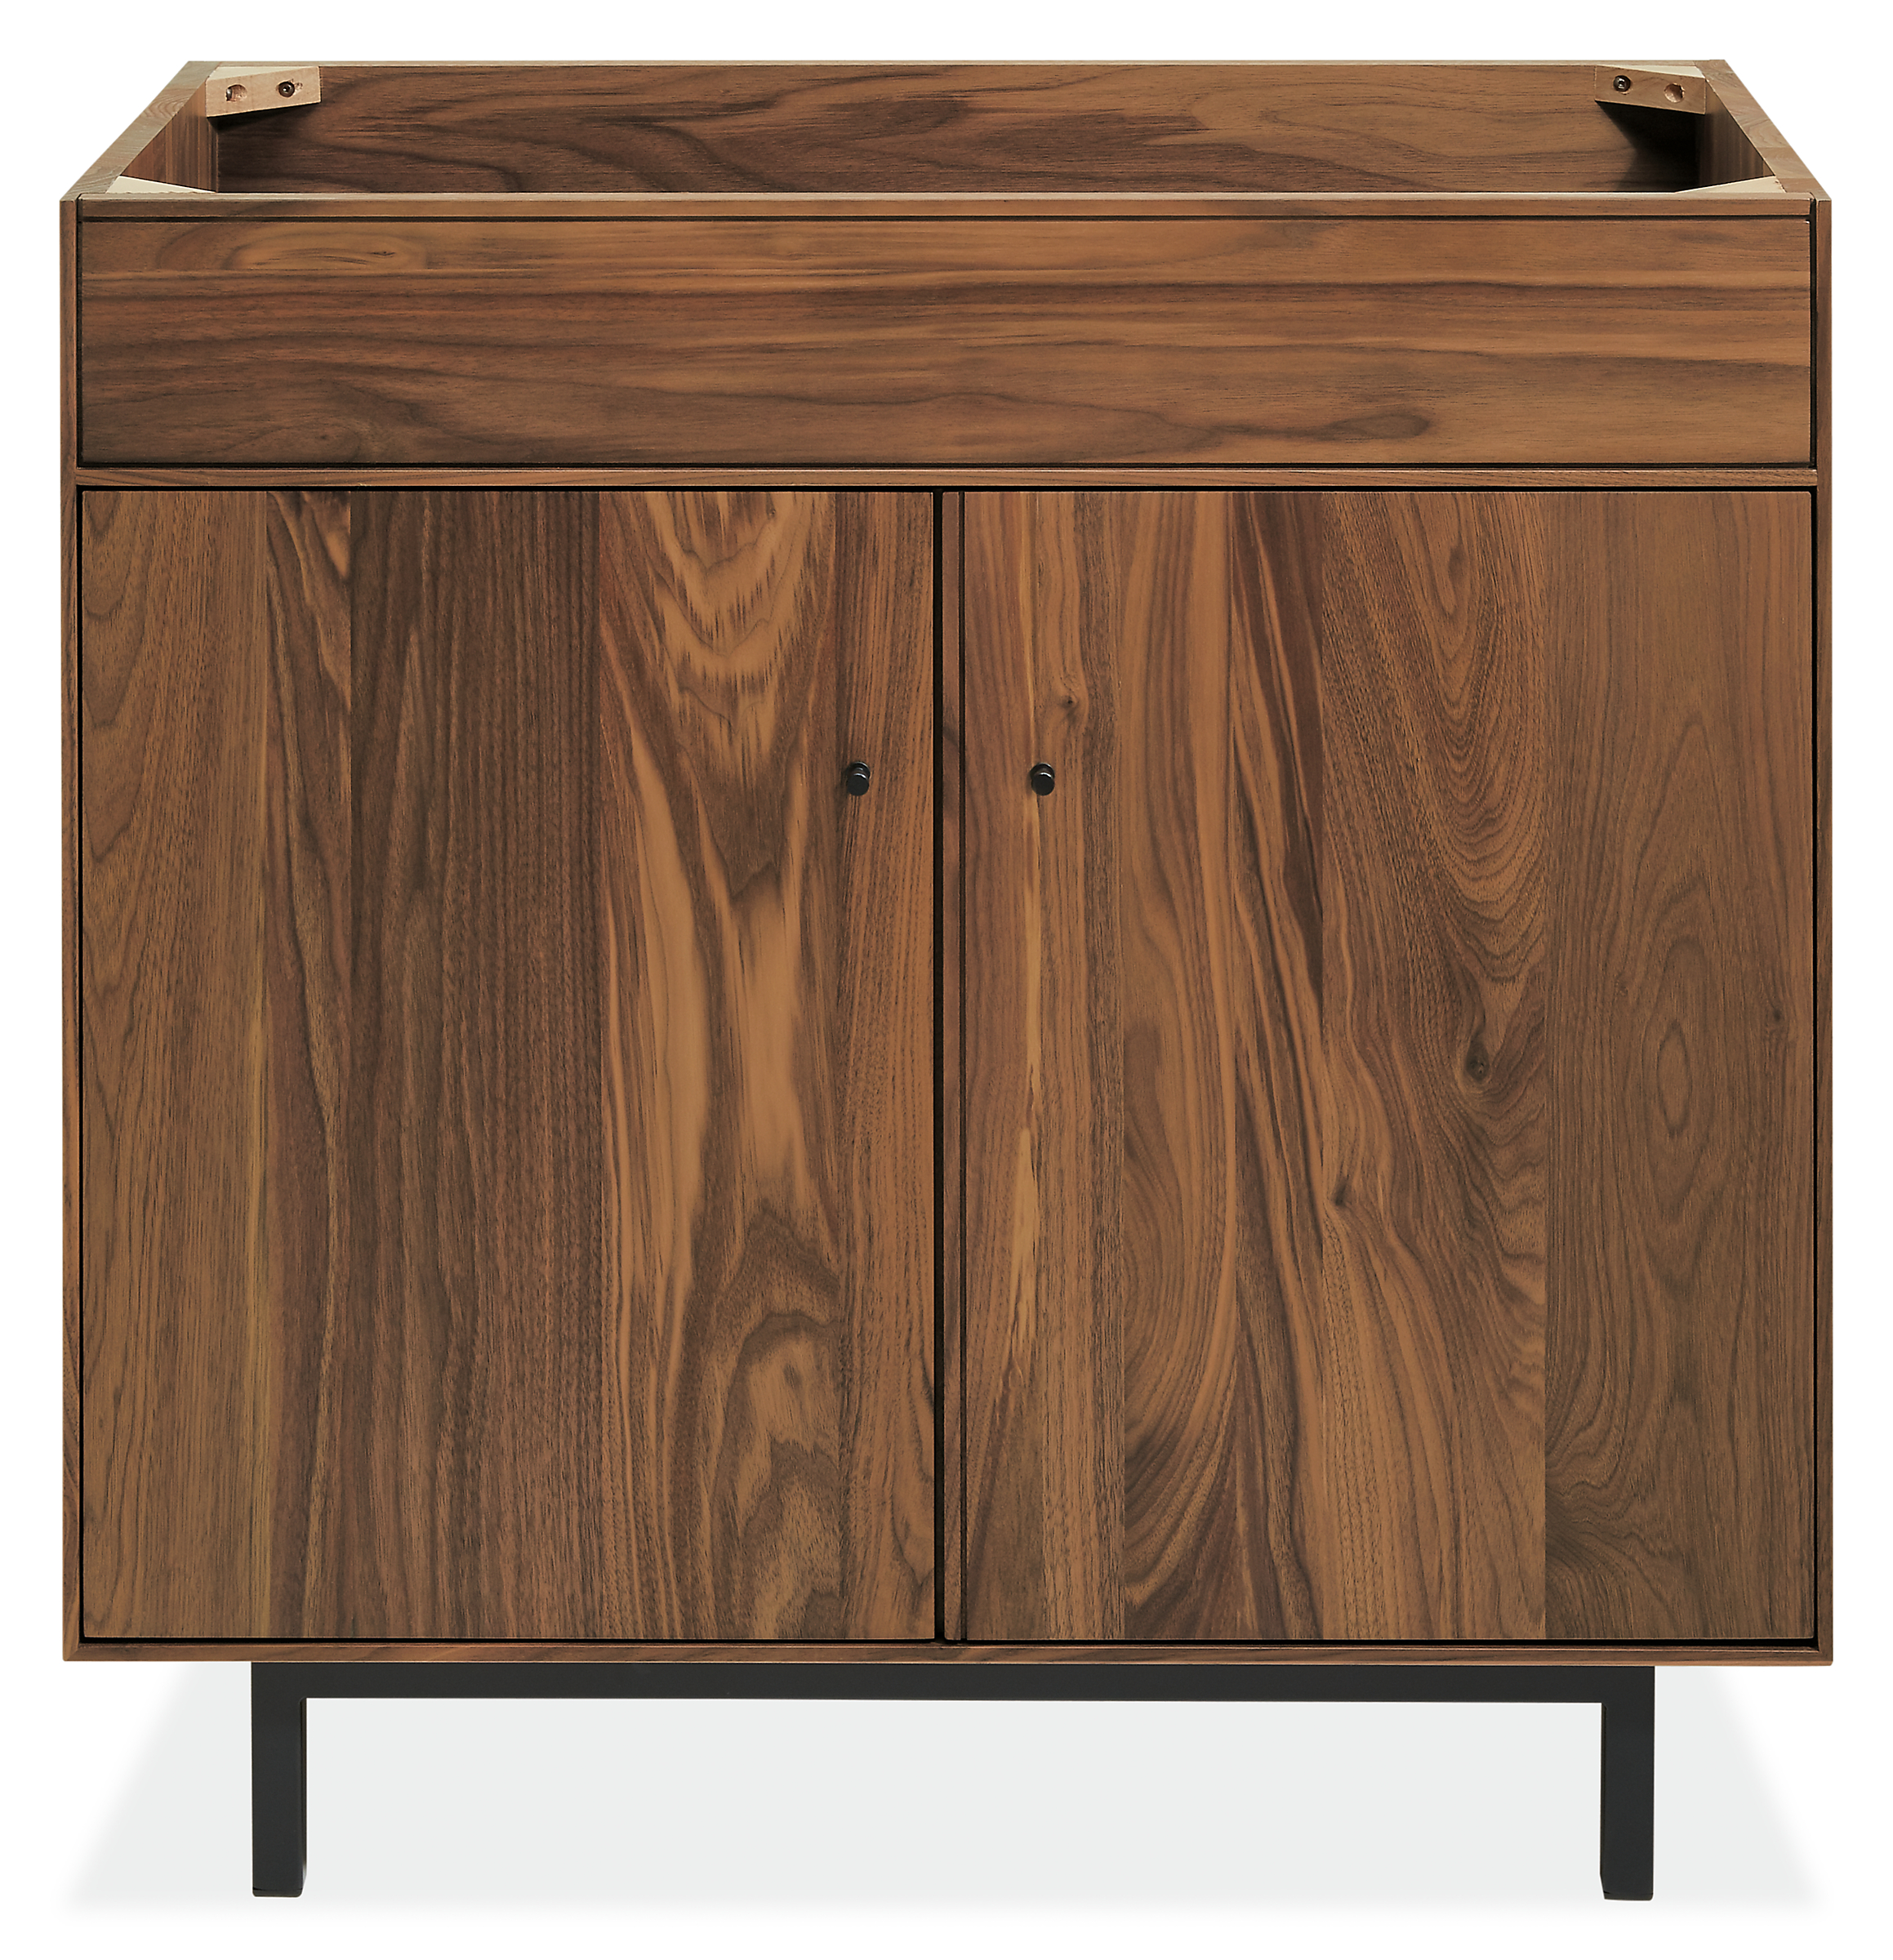 Detail of Hudson bathroom vanity base cabinet without top.